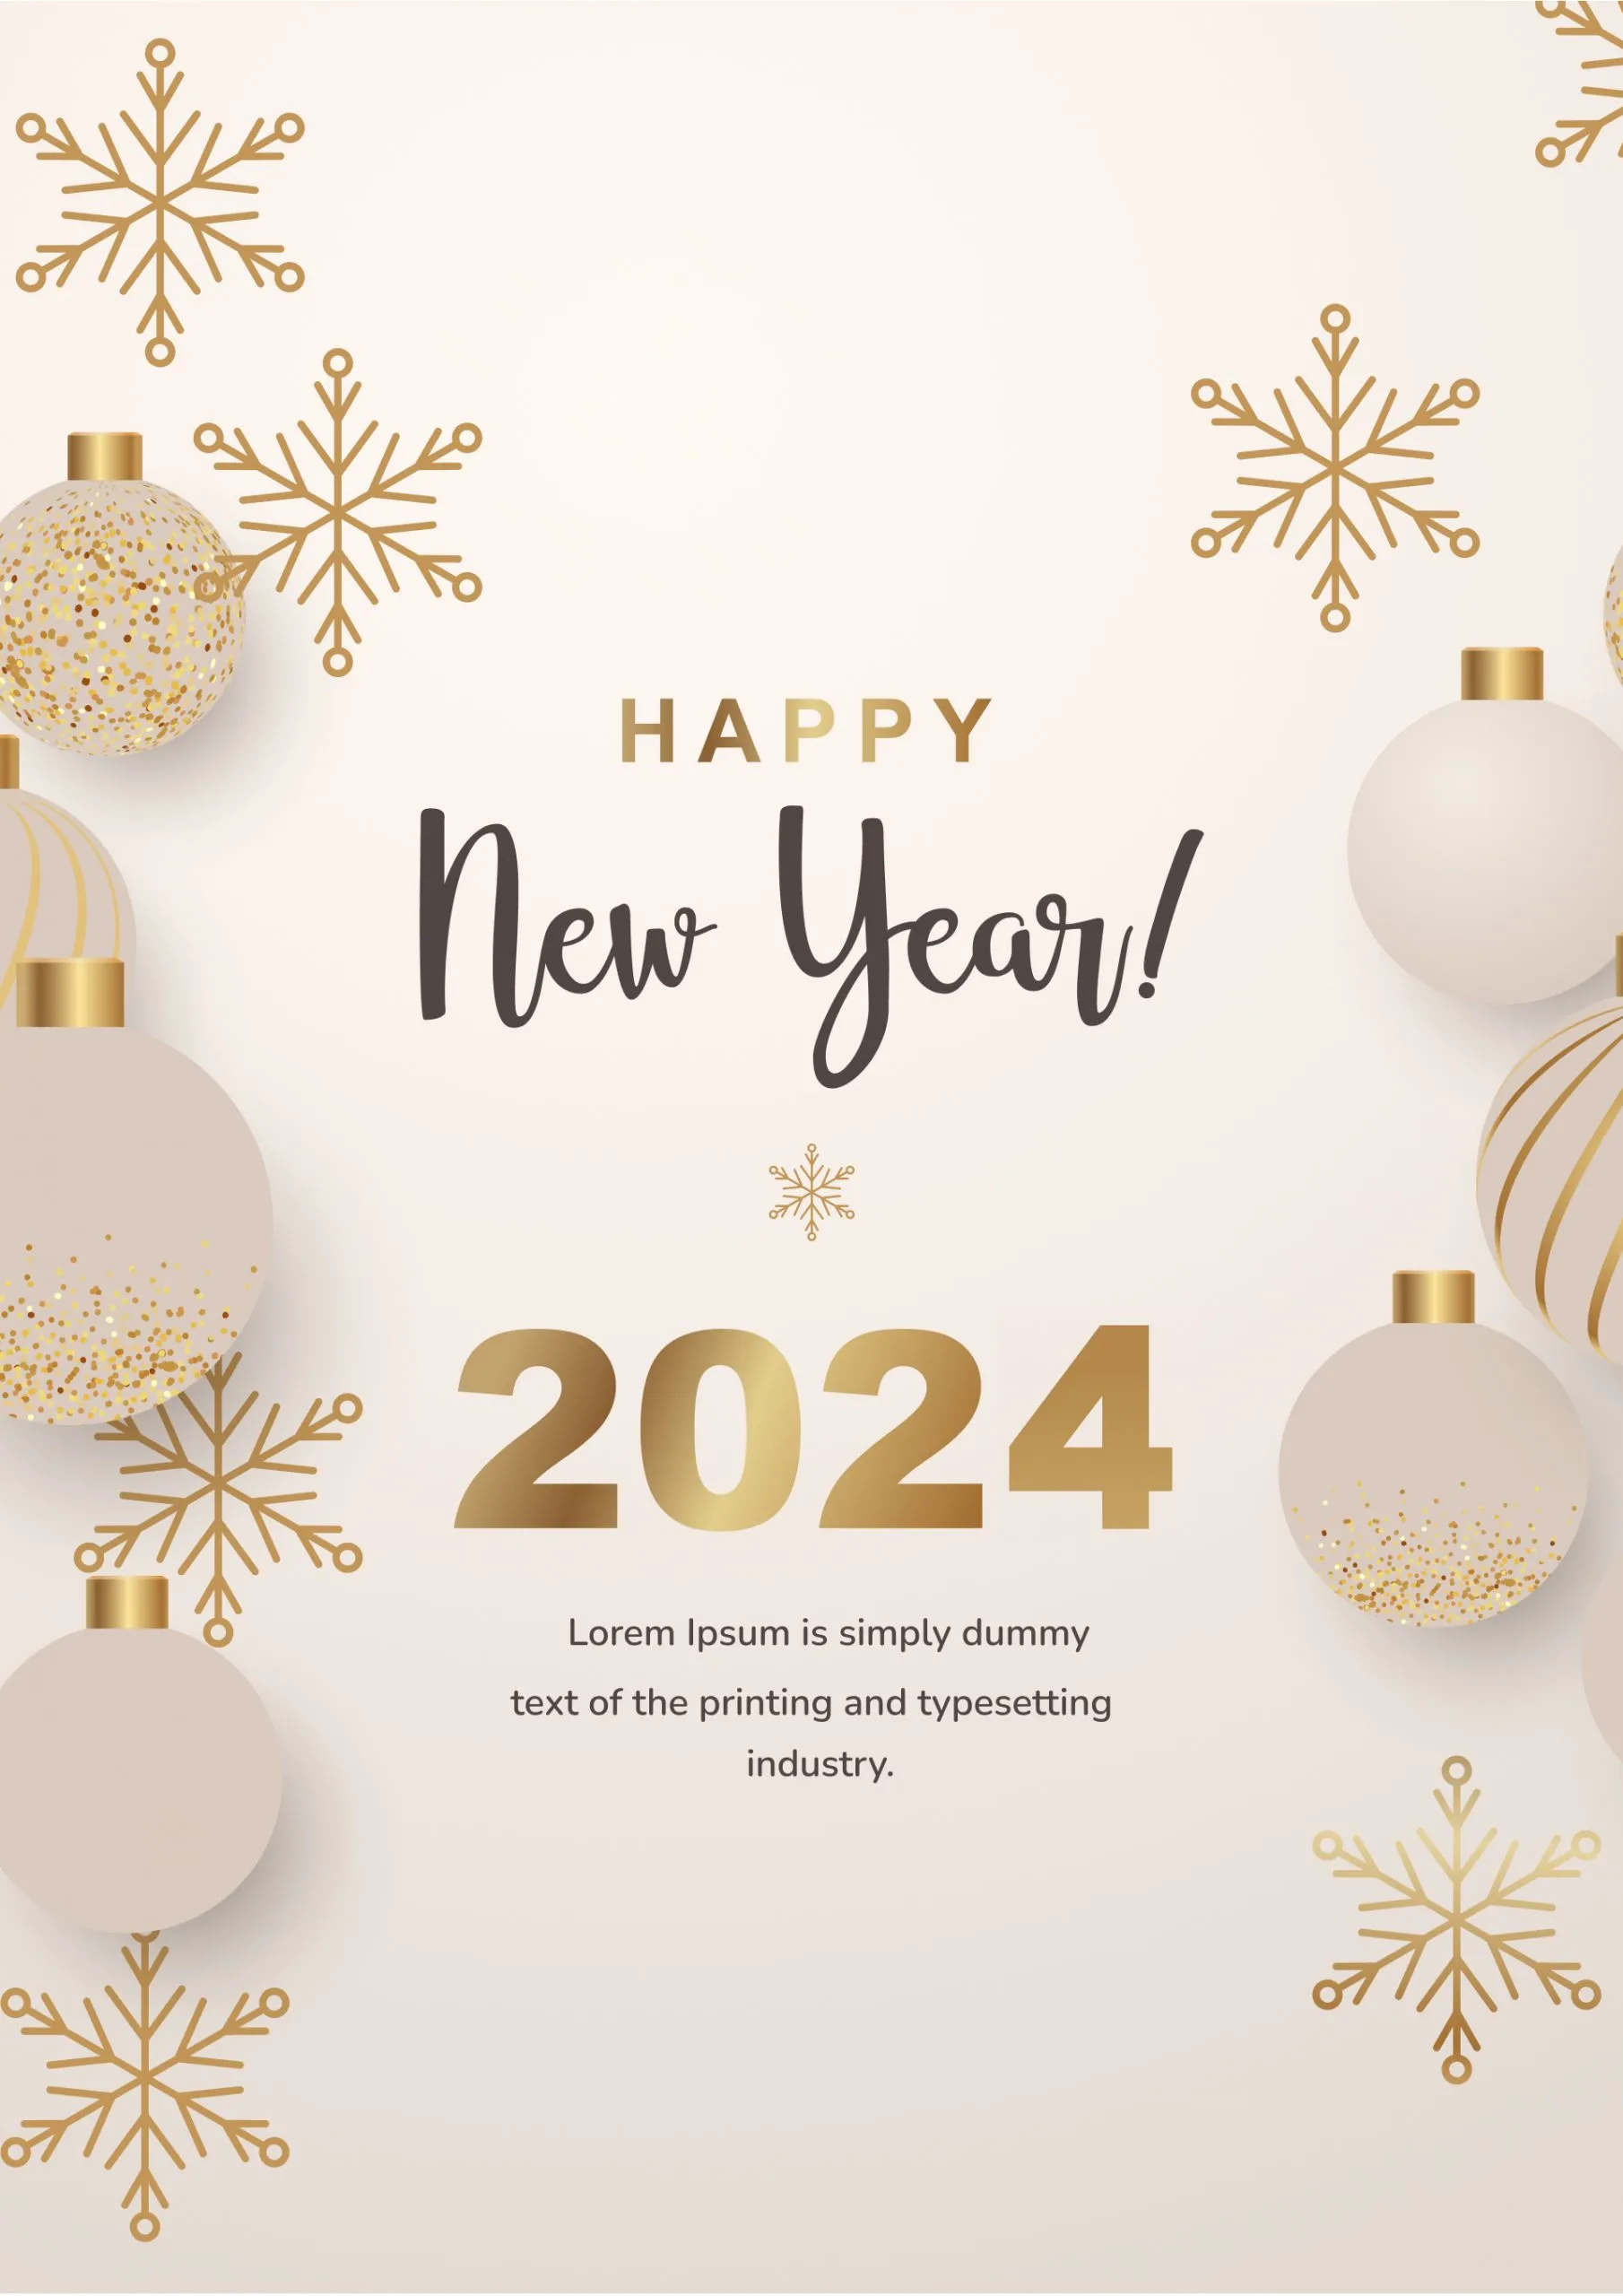 happy holidays message happy new year card template